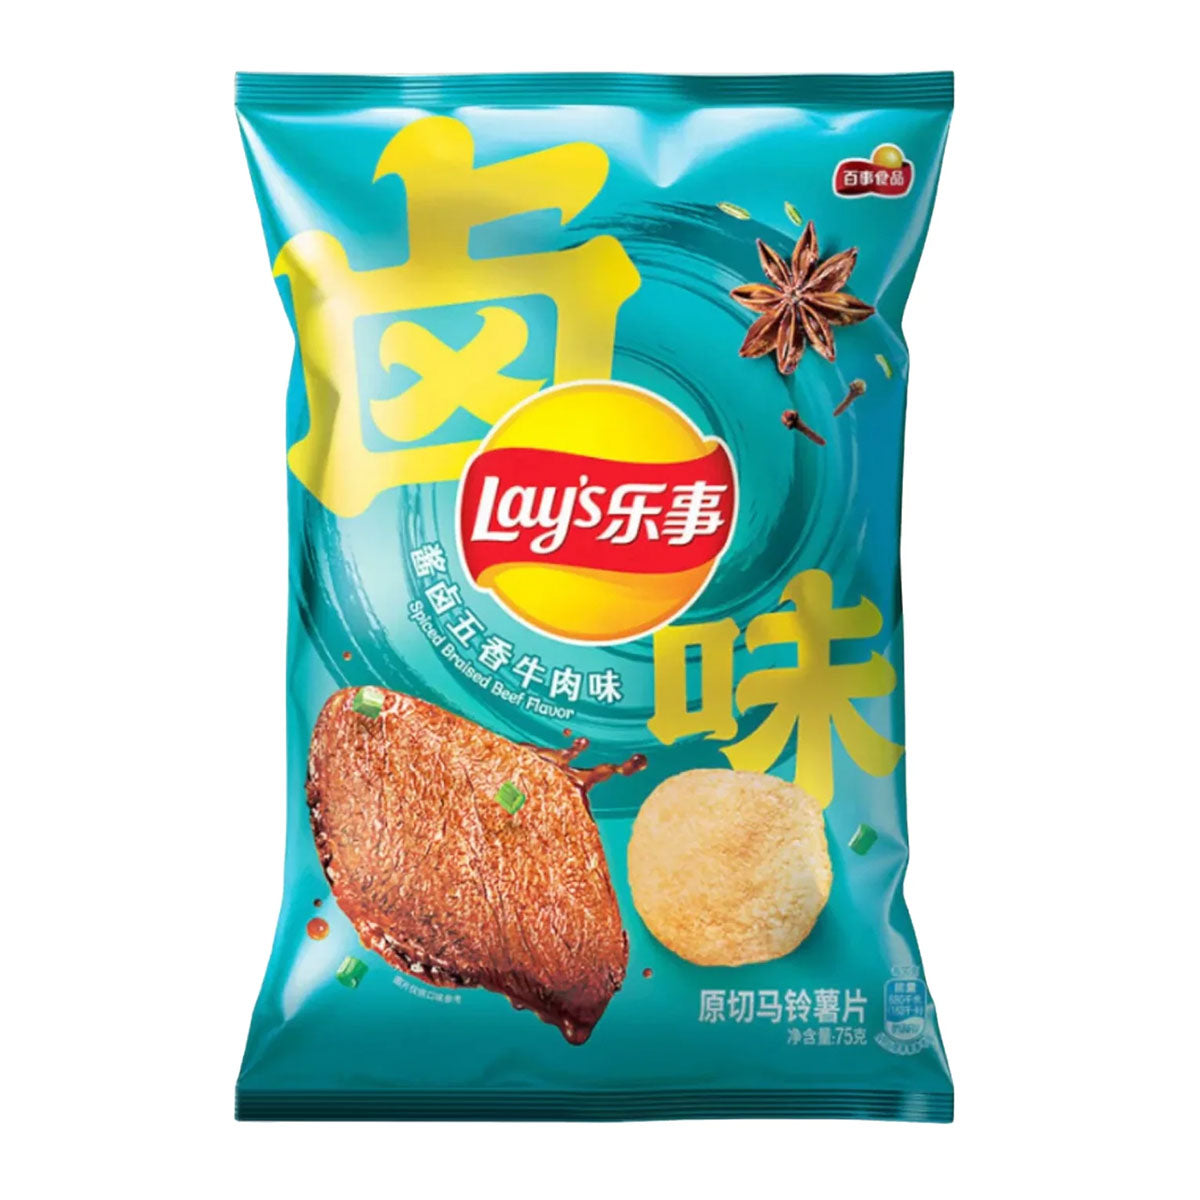 Lay's Potato Chips Spiced Braised Beef Flavor - 70g